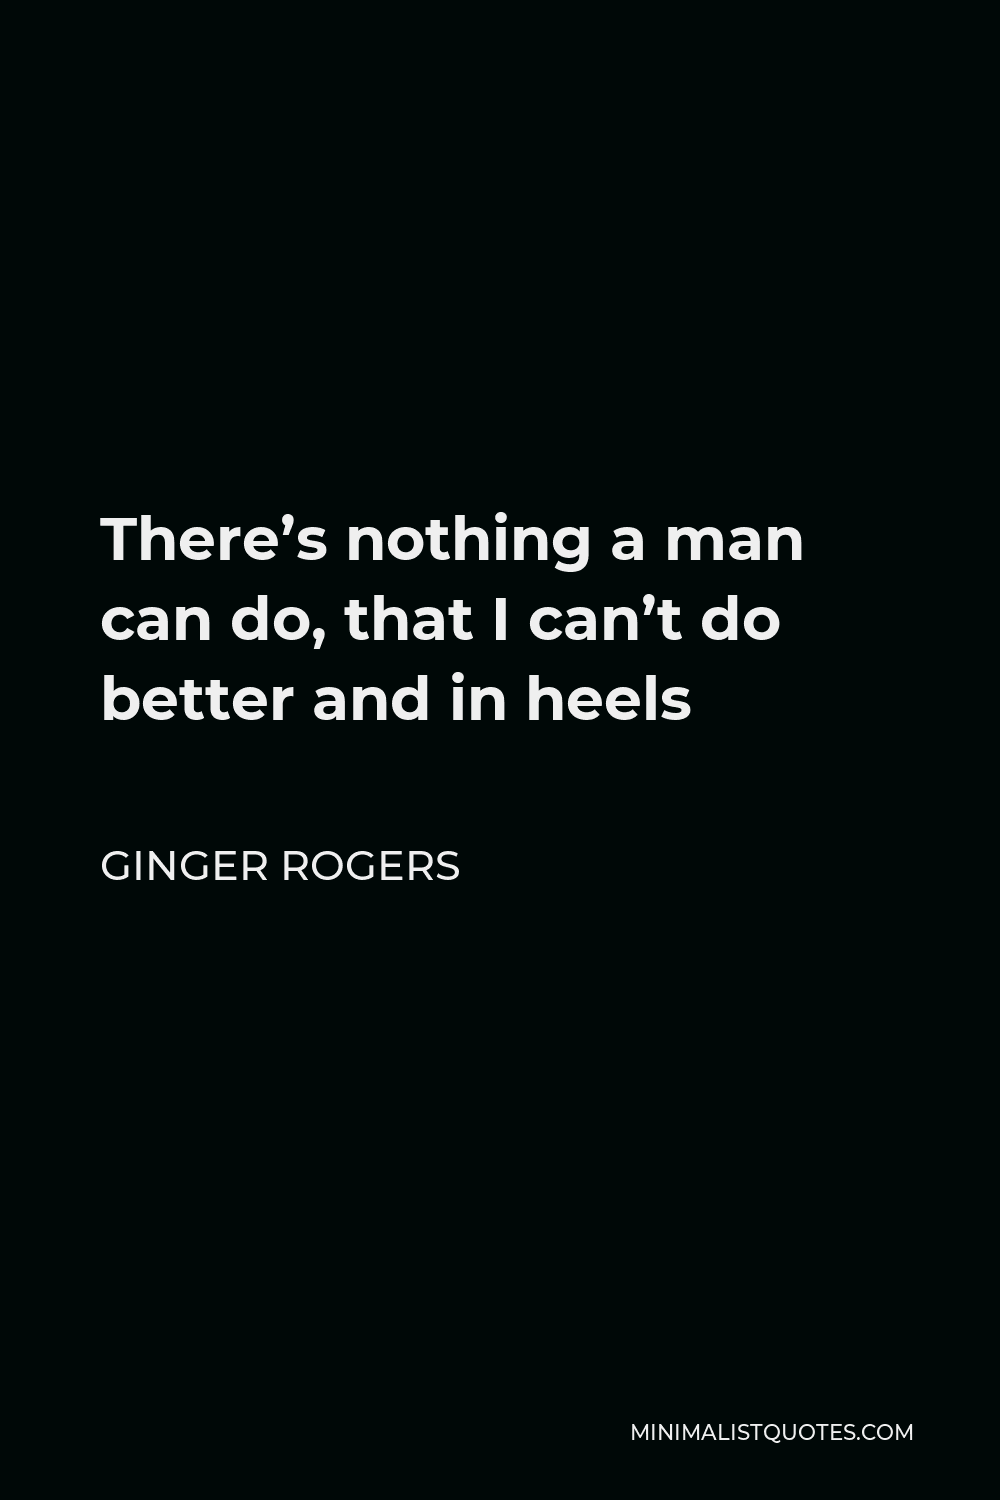 Ginger Rogers Quote - There’s nothing a man can do, that I can’t do better and in heels